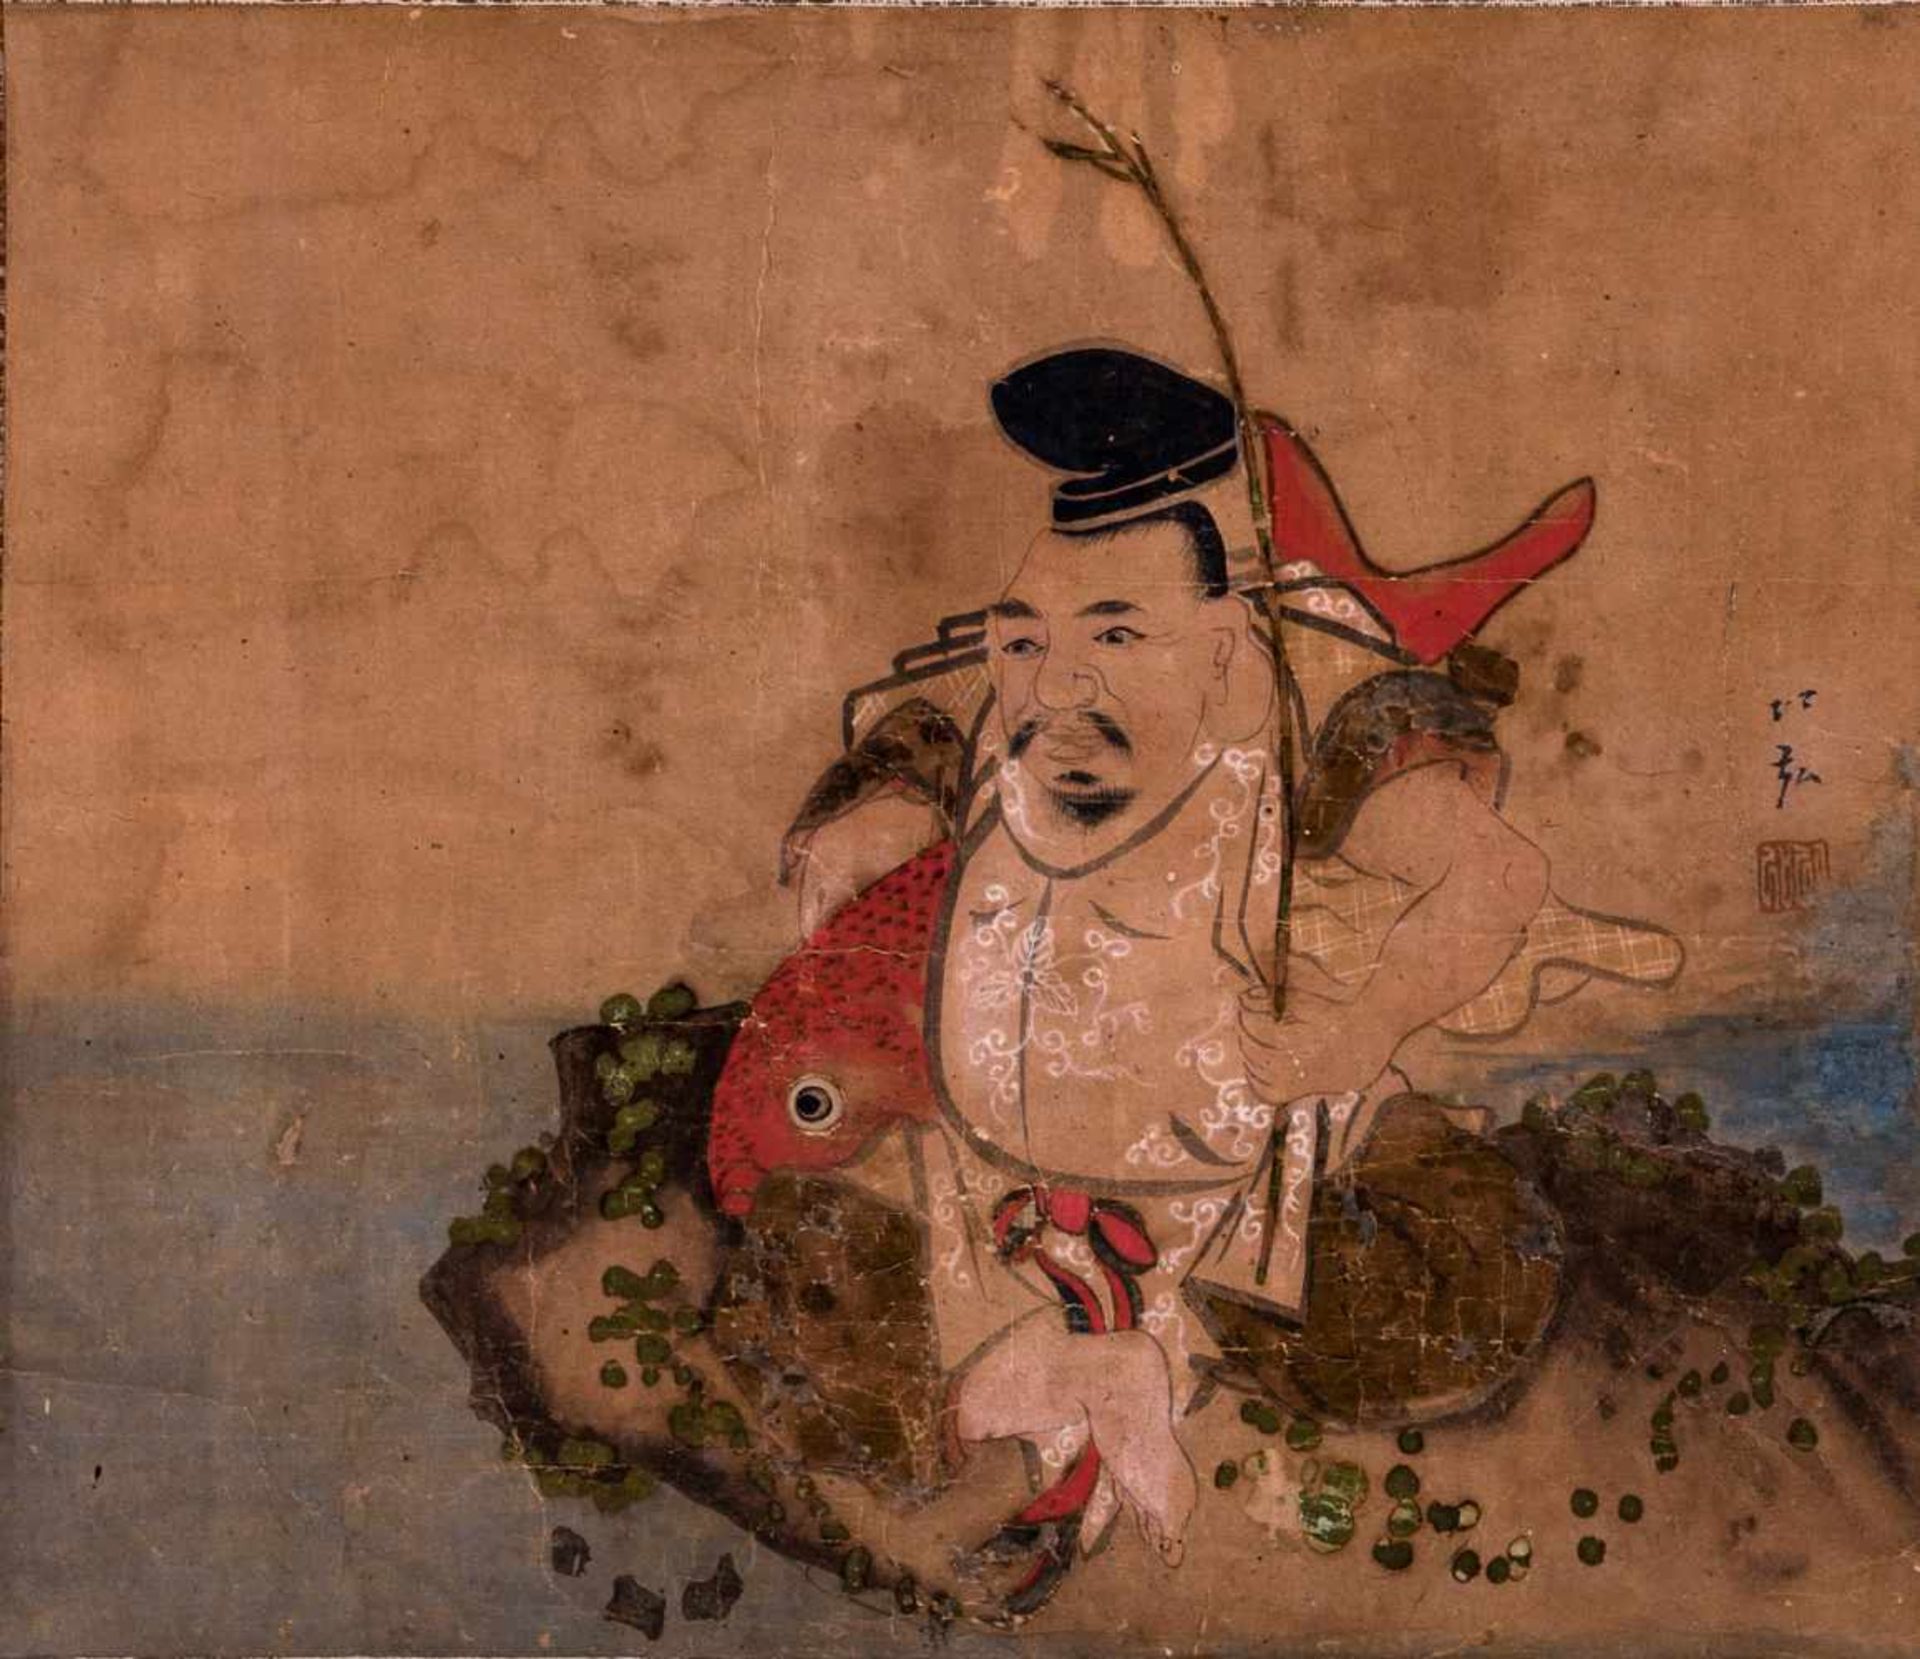 JAPANESE SCROLL PAINTING WITH EBISU - 19th CENTURYInk and gouache on paper, mounted to a brocade